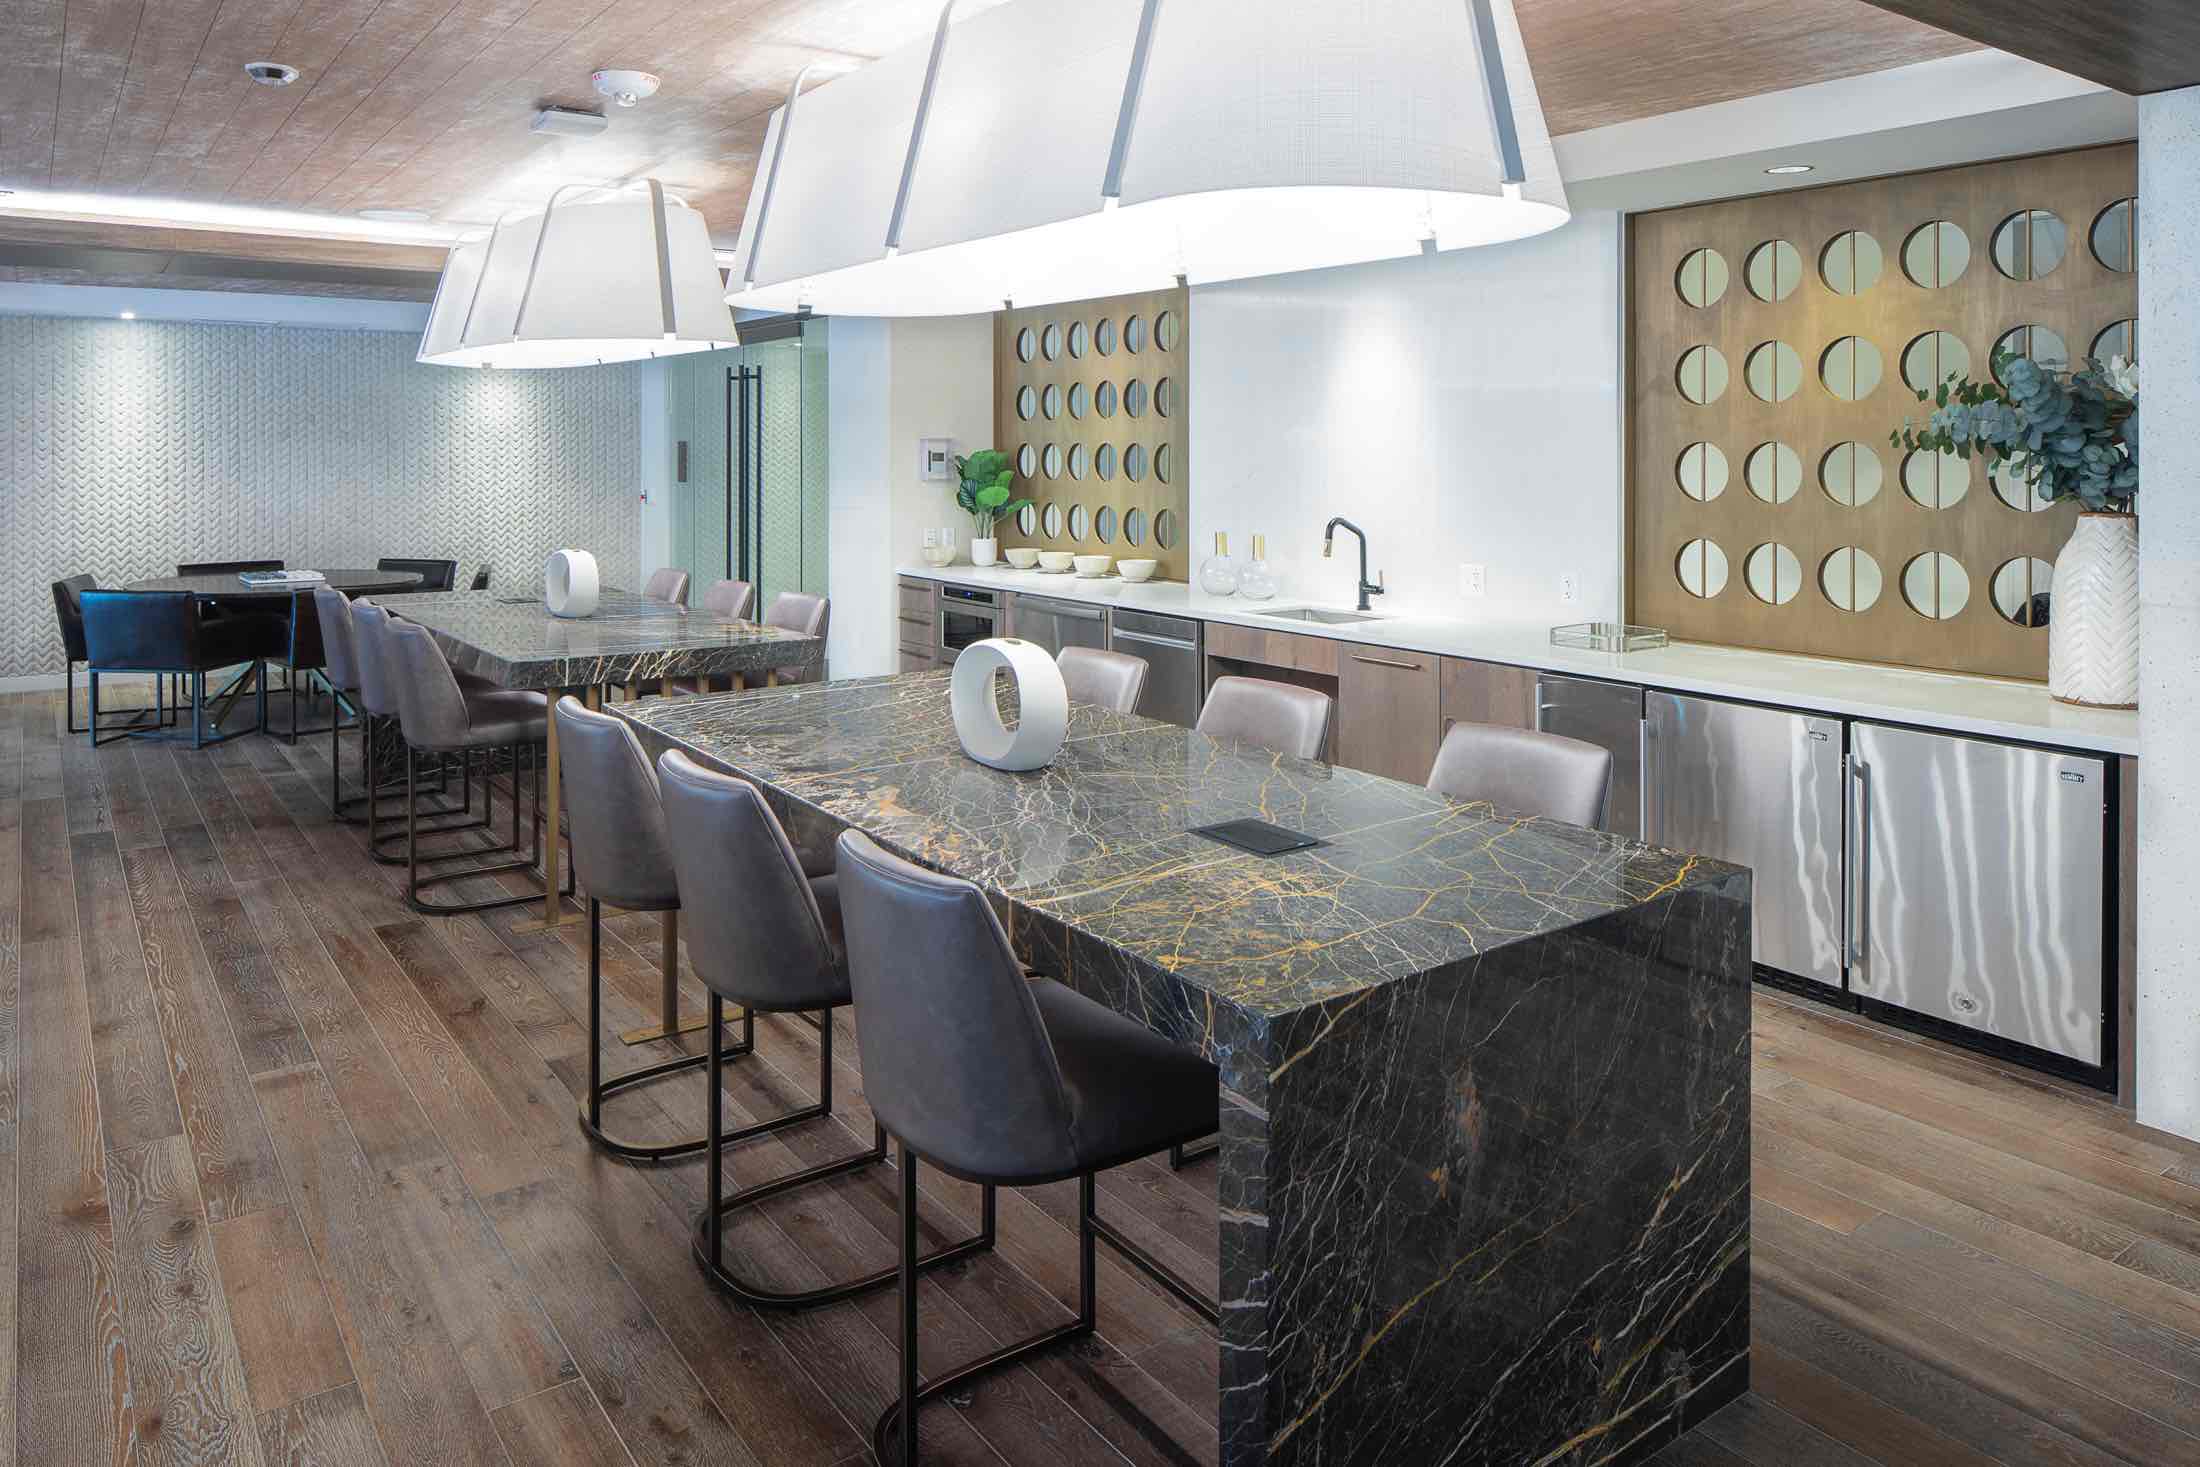 Clubroom bar lounge with marble countertops & plush seating. One of the amenities of 250 Mission in Baltimore, MD.